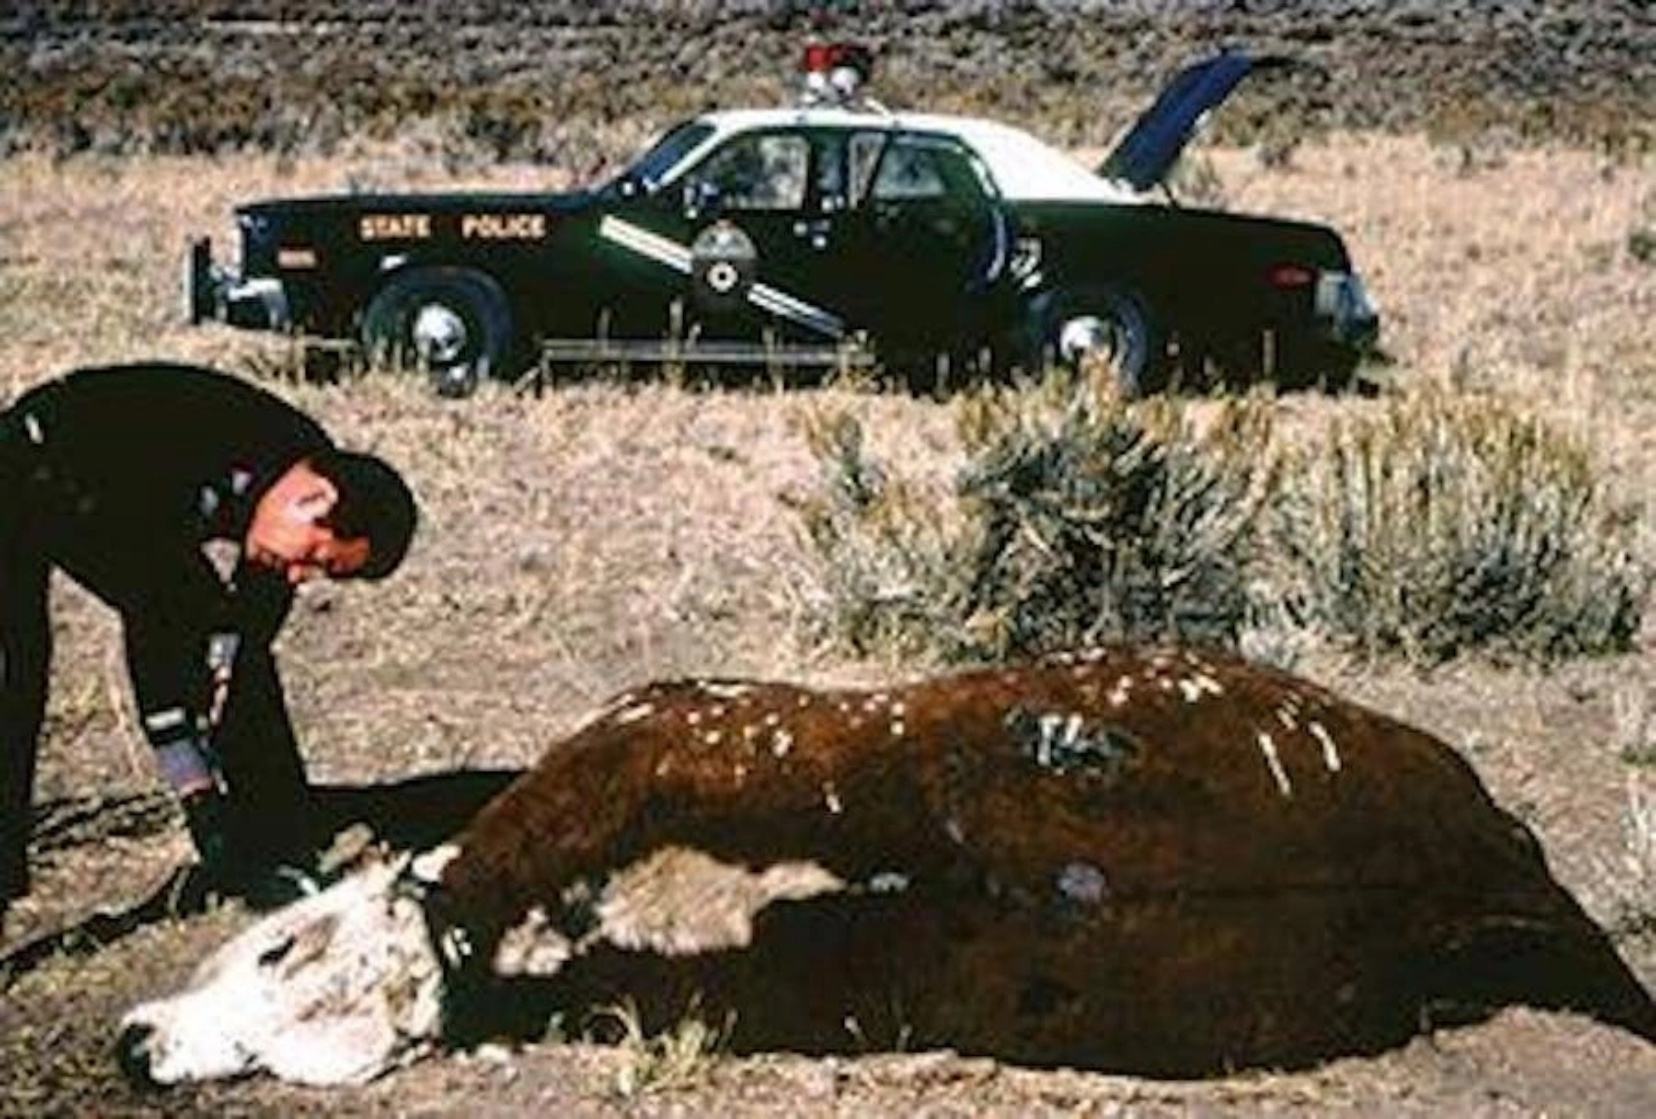 Gabe Valdez, a former New Mexico State Police trooper, claimed to find a mutilated cow with a strange creature inside